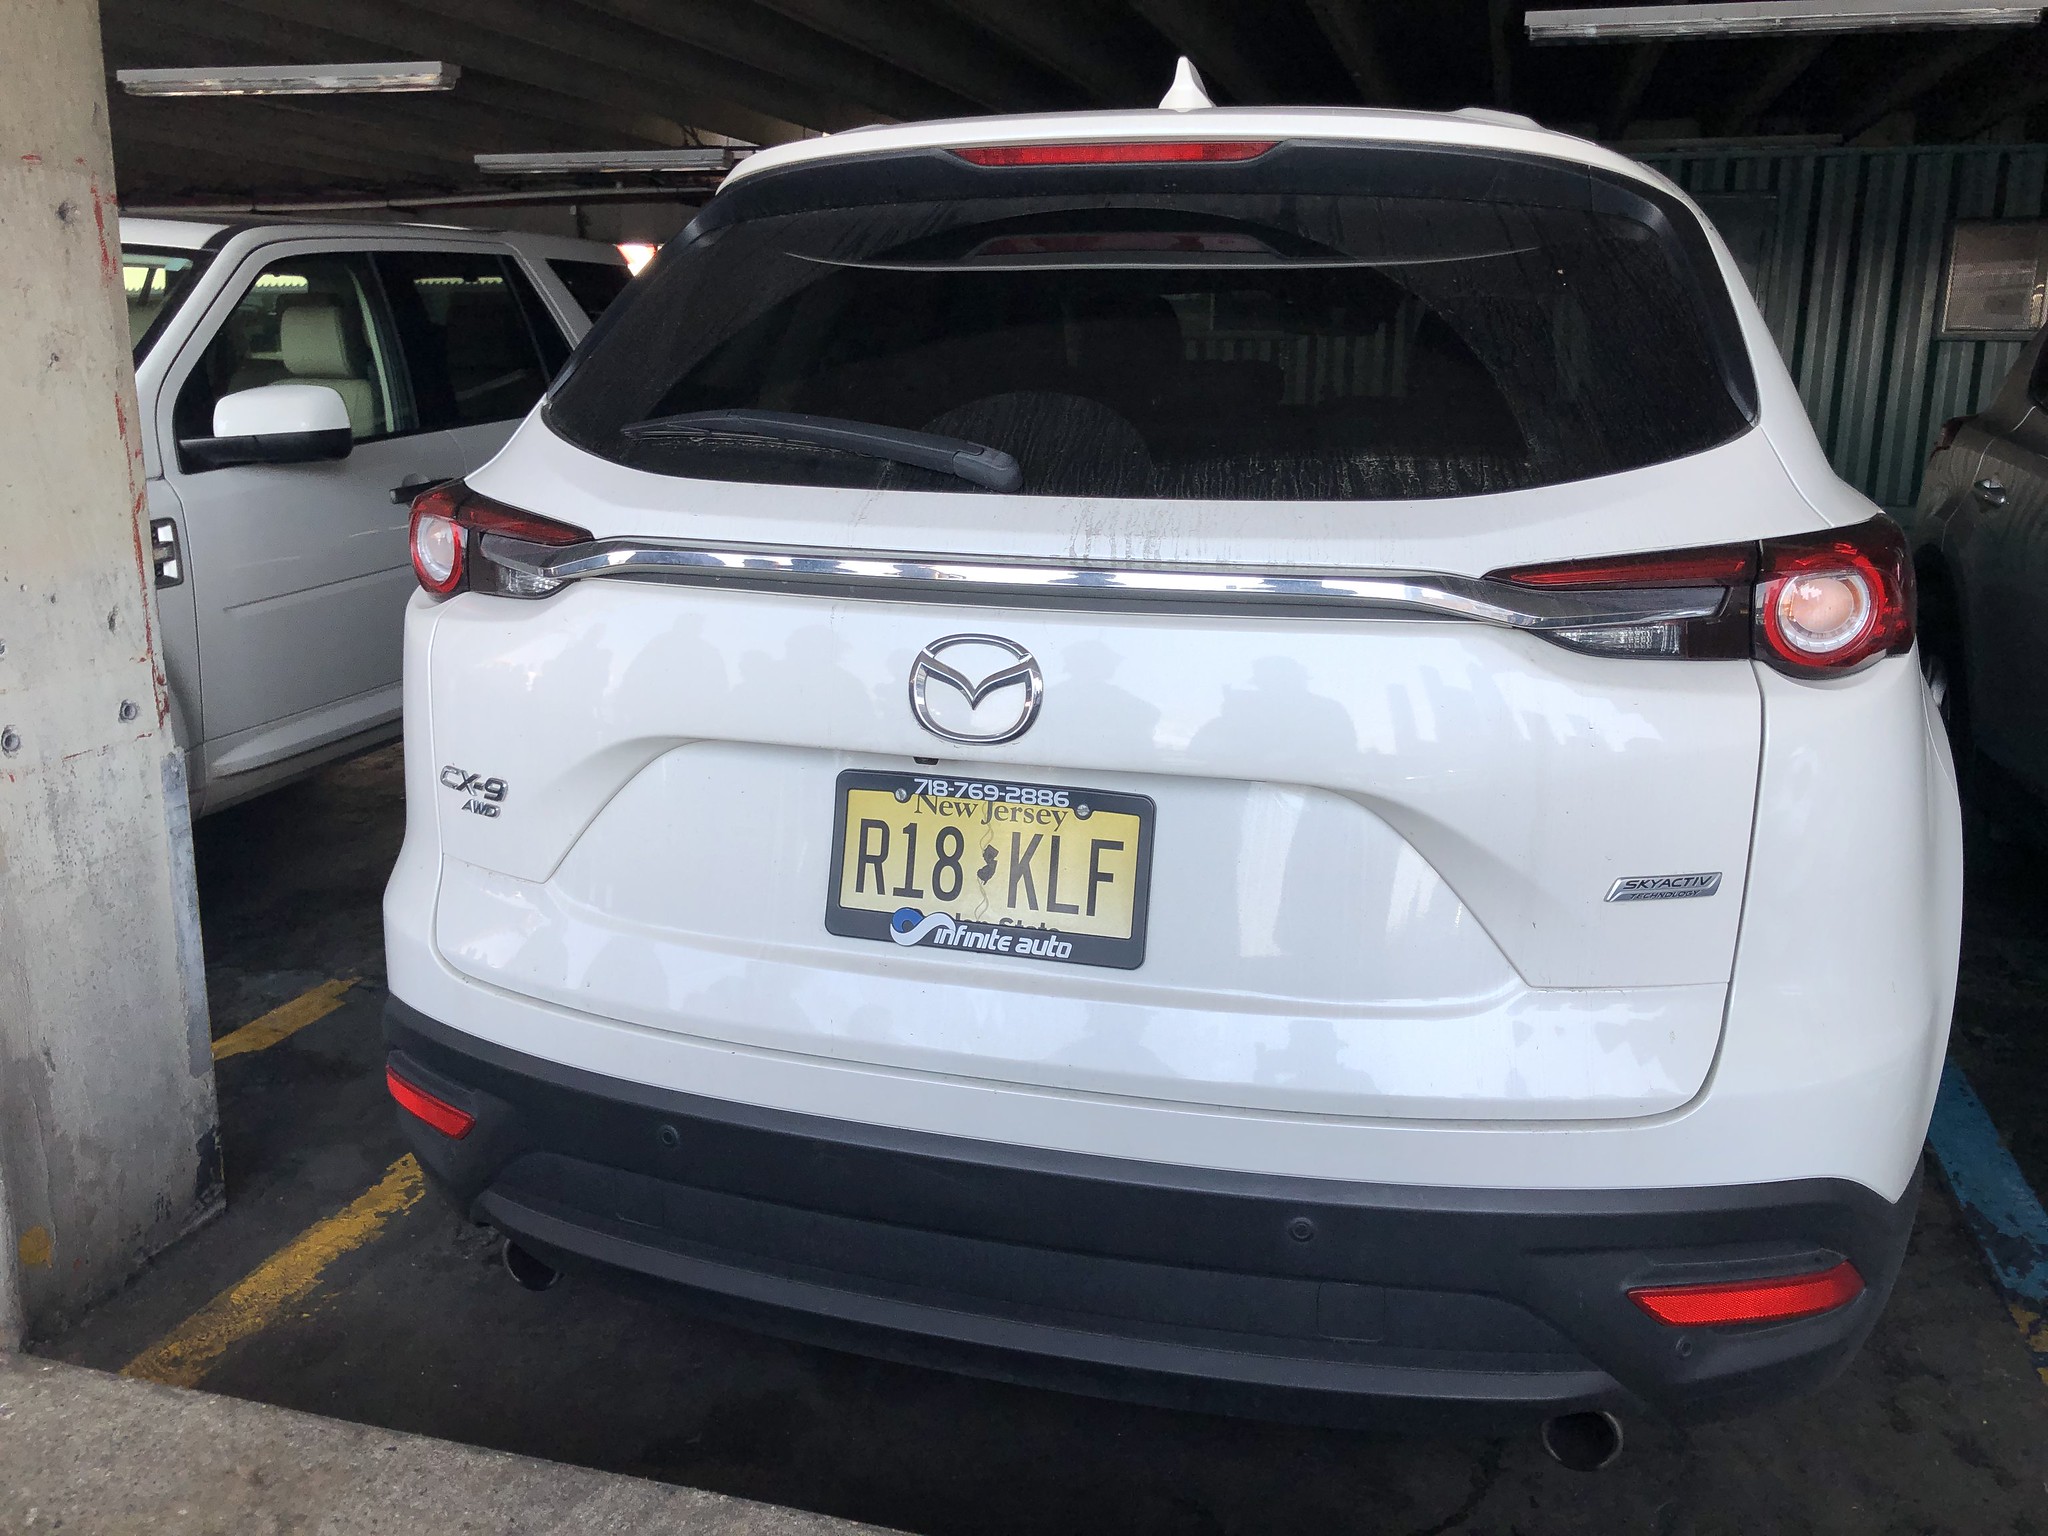 photo of a white Mazda with New Jersey plates R18 KLF